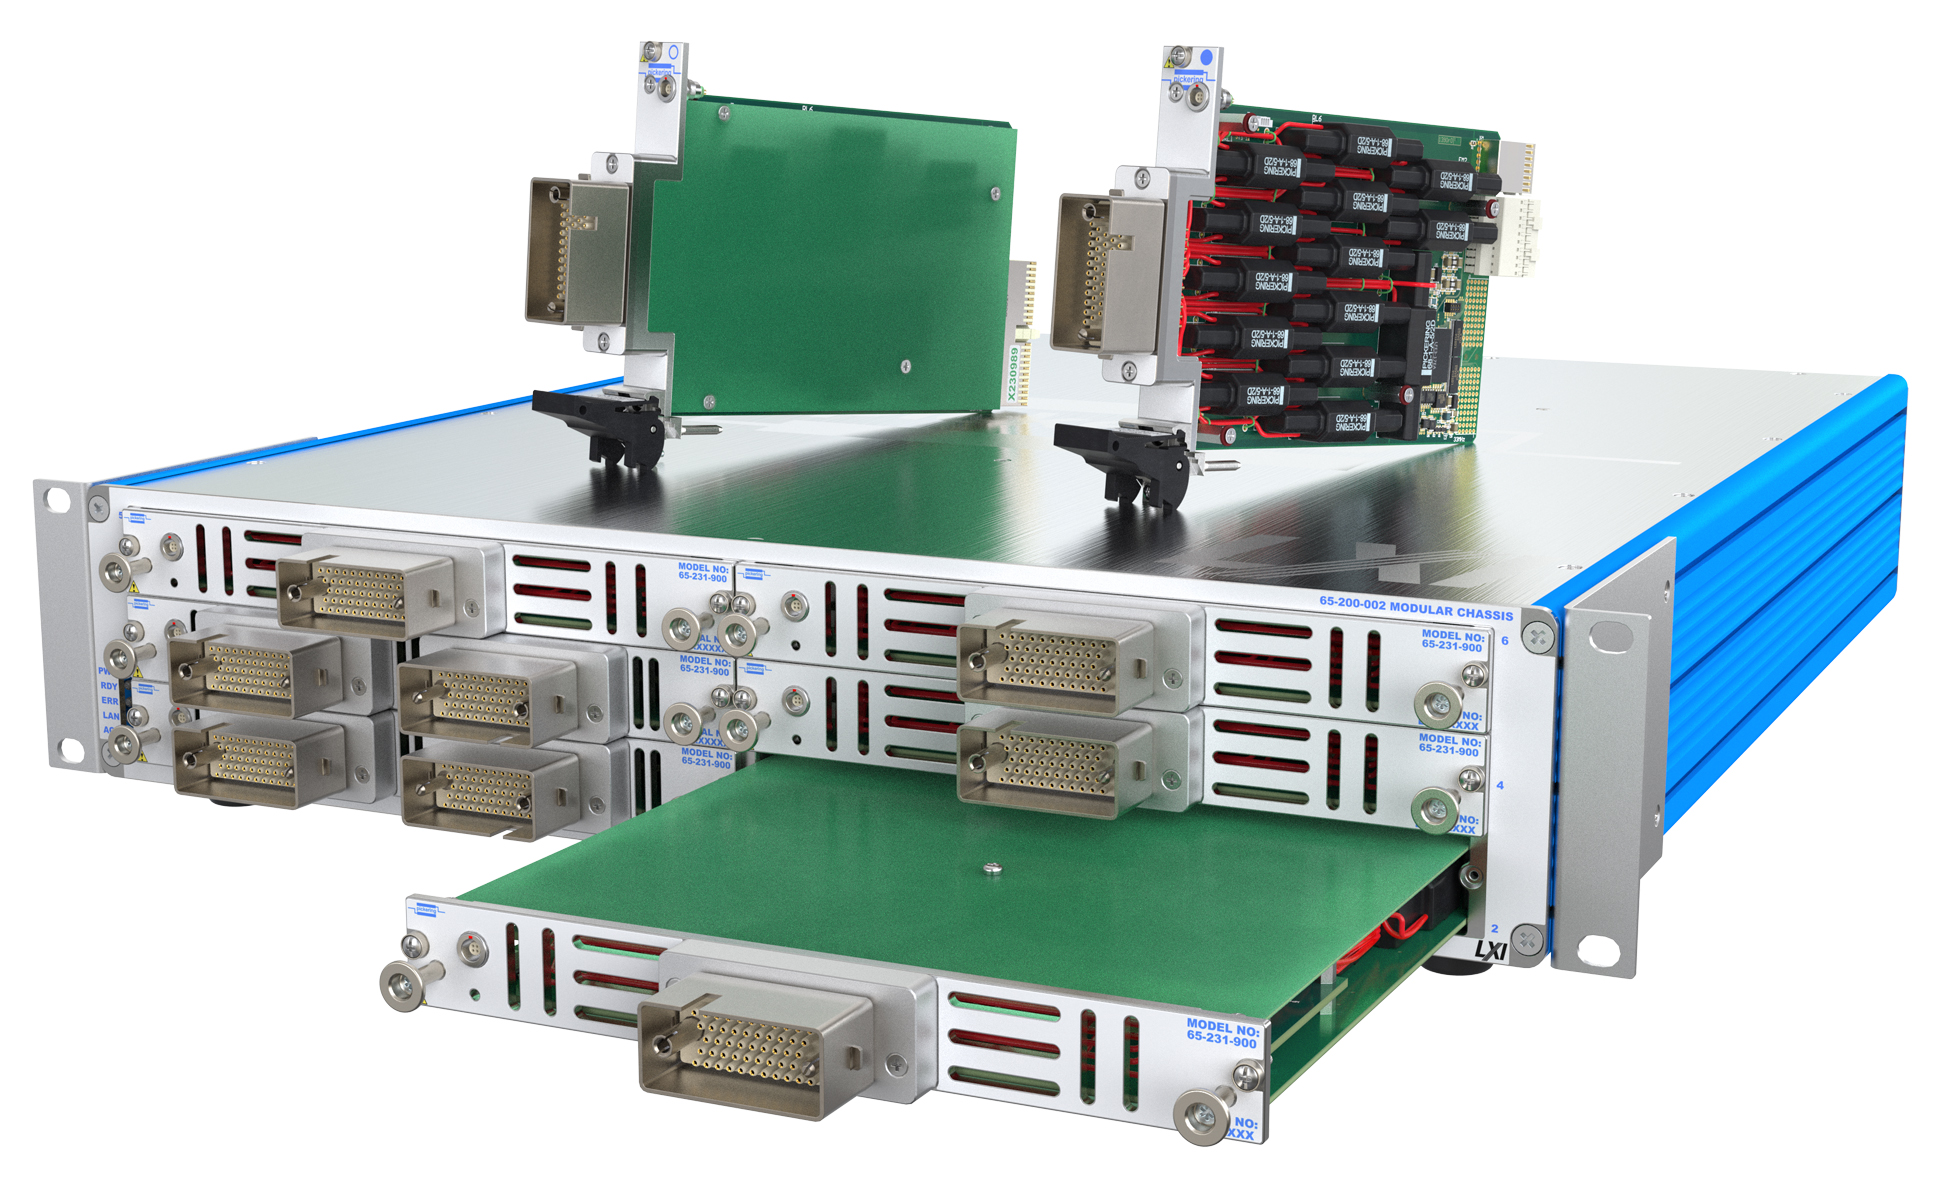 9 kV high voltage PXI & LXI switching modules from Pickering